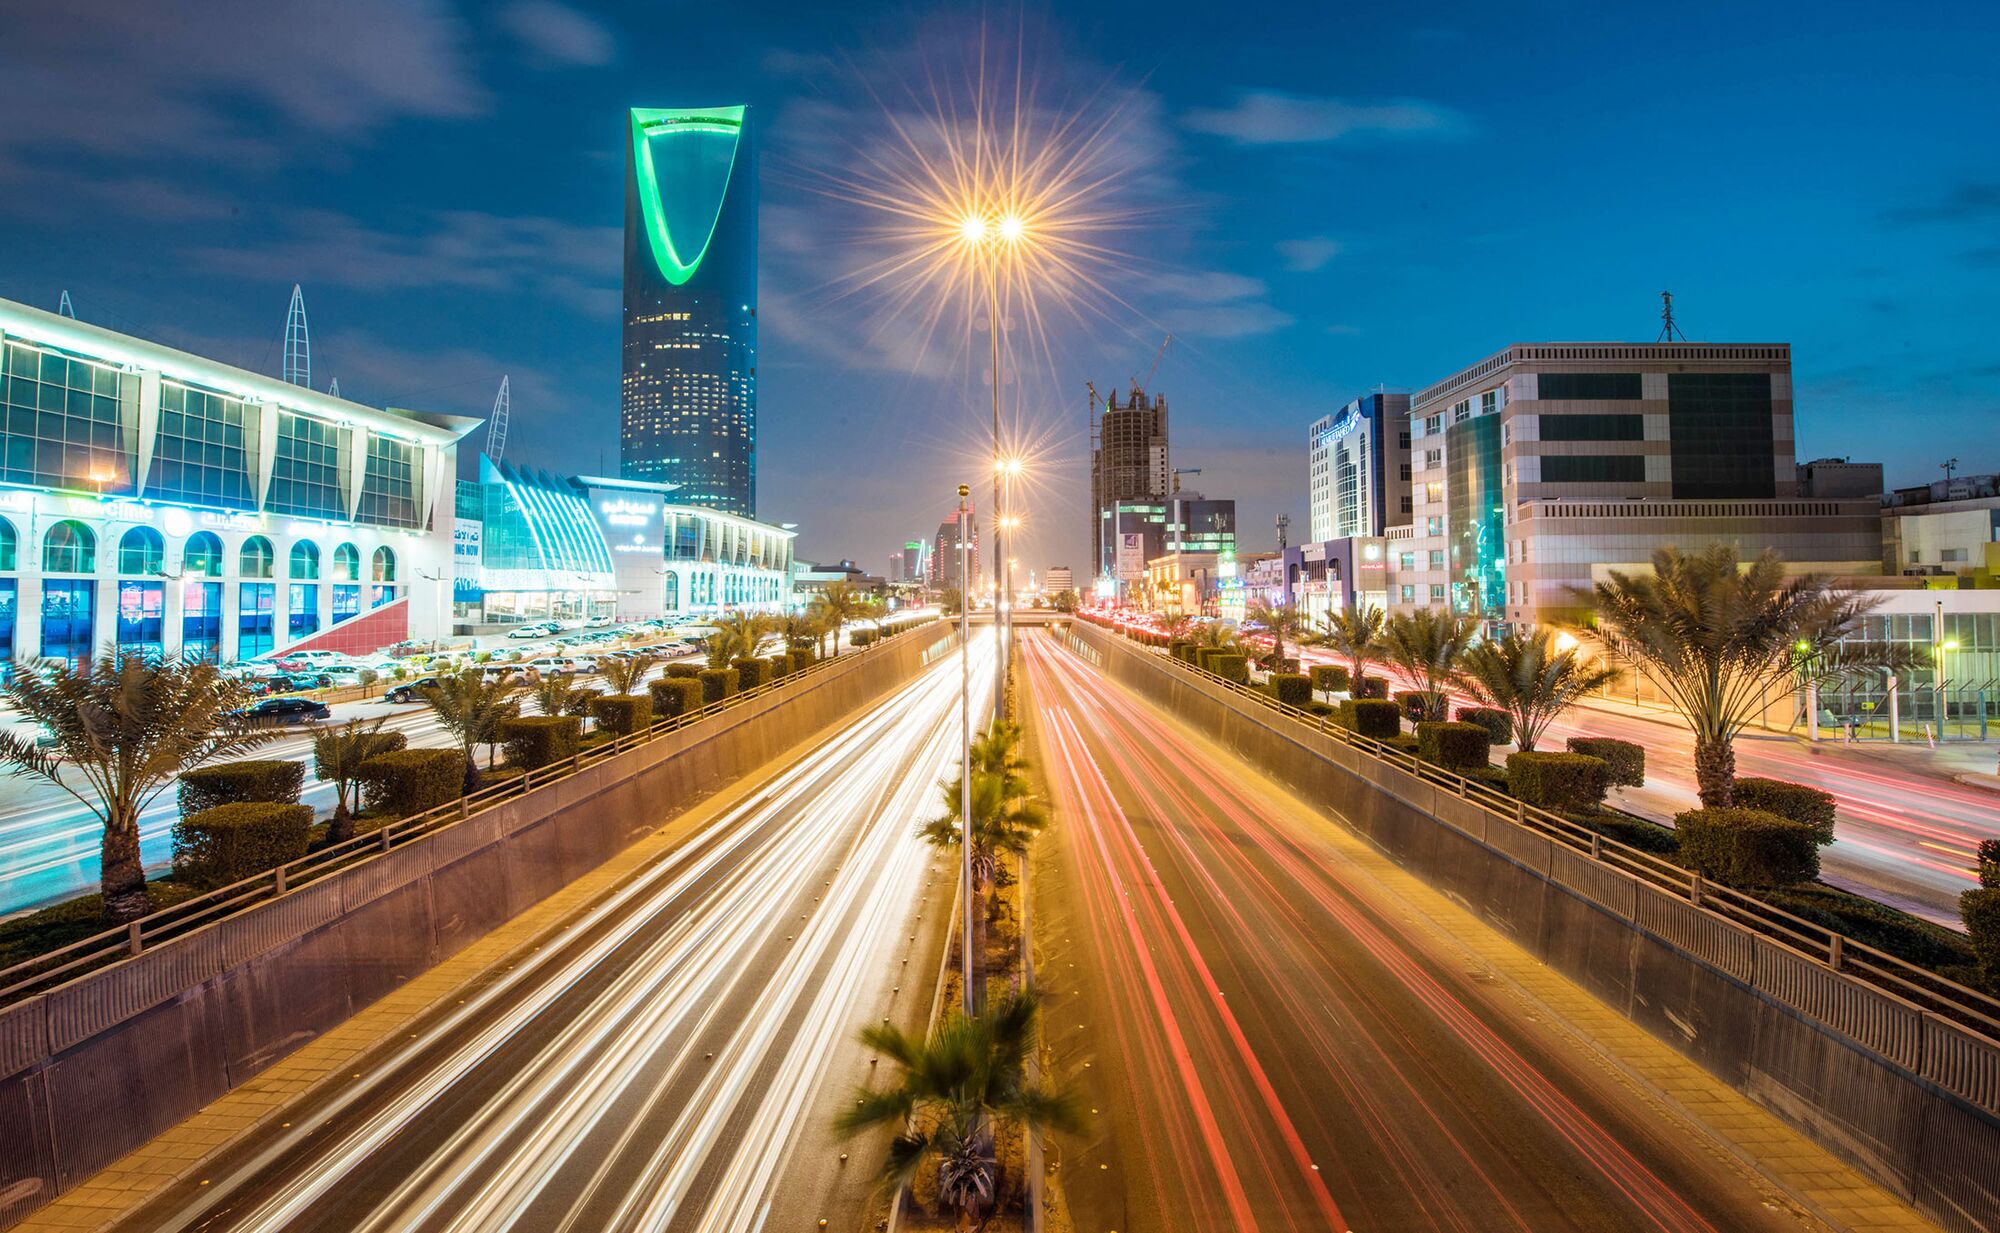 Saudi Arabia Bets on Web3 Gaming to Diversify its Economy